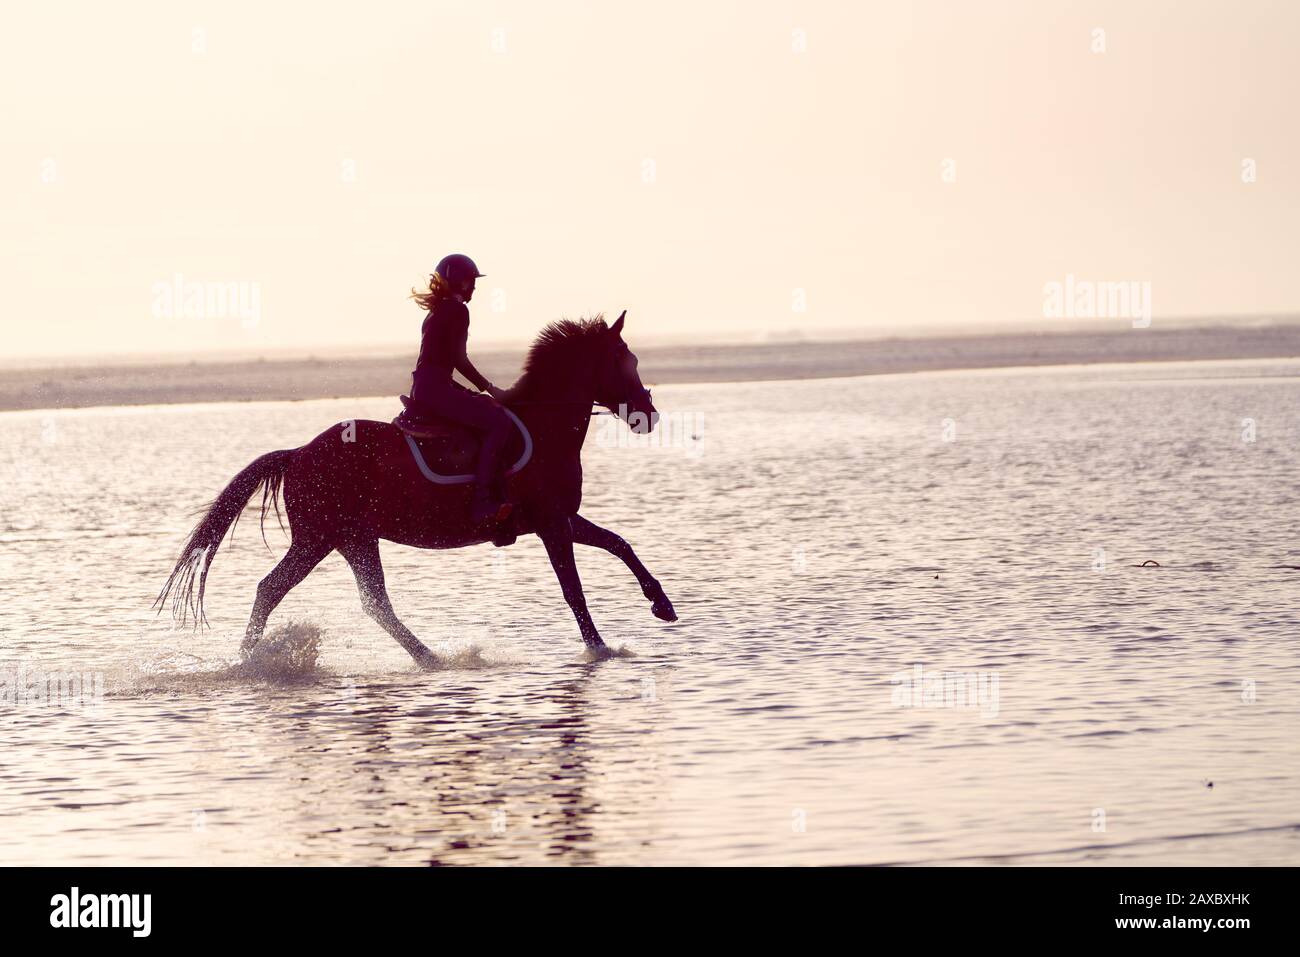 Young woman galloping on horseback in ocean surf Stock Photo